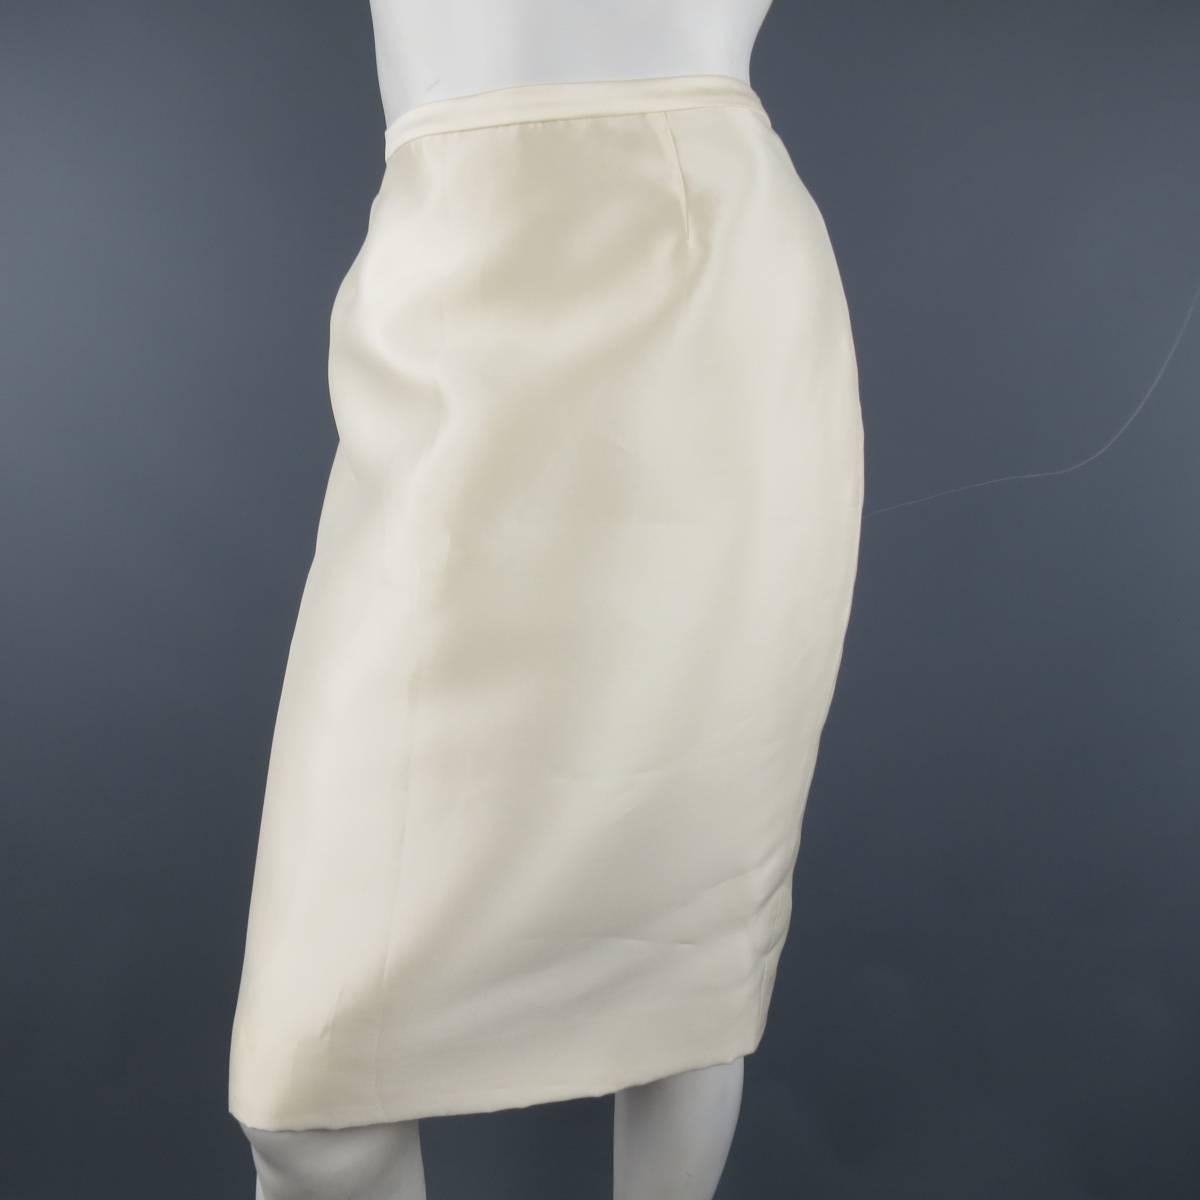 BADGLEY MISCHKA pencil skirt in a cream structured satin material with hidden back zip closure. Made in USA.
 
Excellent Pre-Owned Condition.
Marked: 6 USA
 
Measurements:
 
Waste: 29 In.
Hips: 39 In.
Length: 22 In.